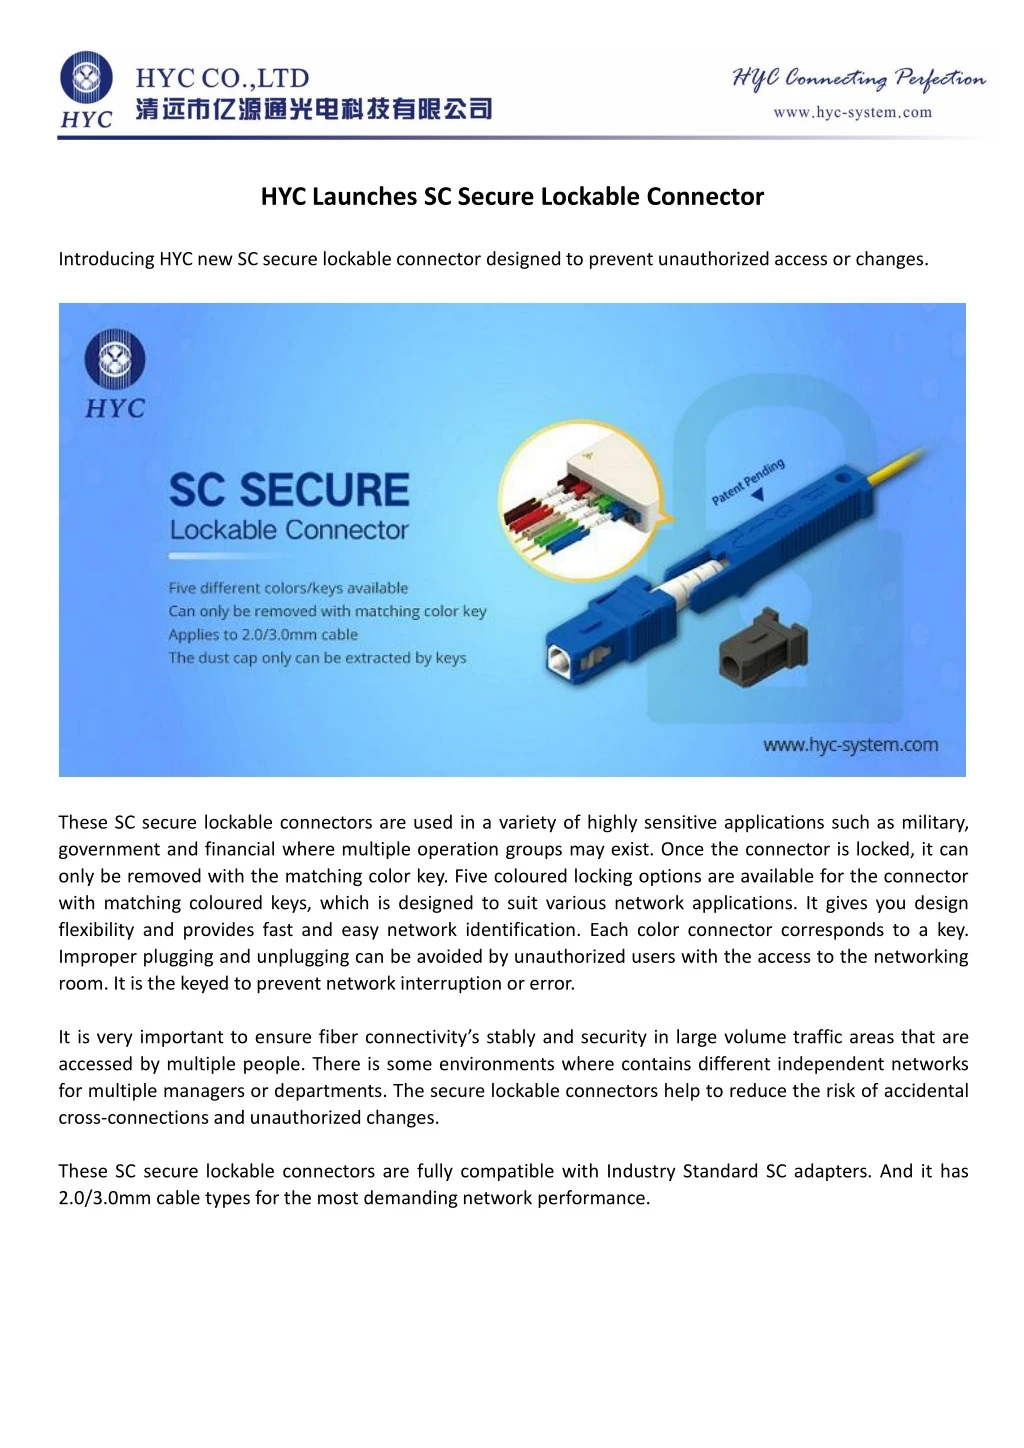 hyc launches sc secure lockable connector